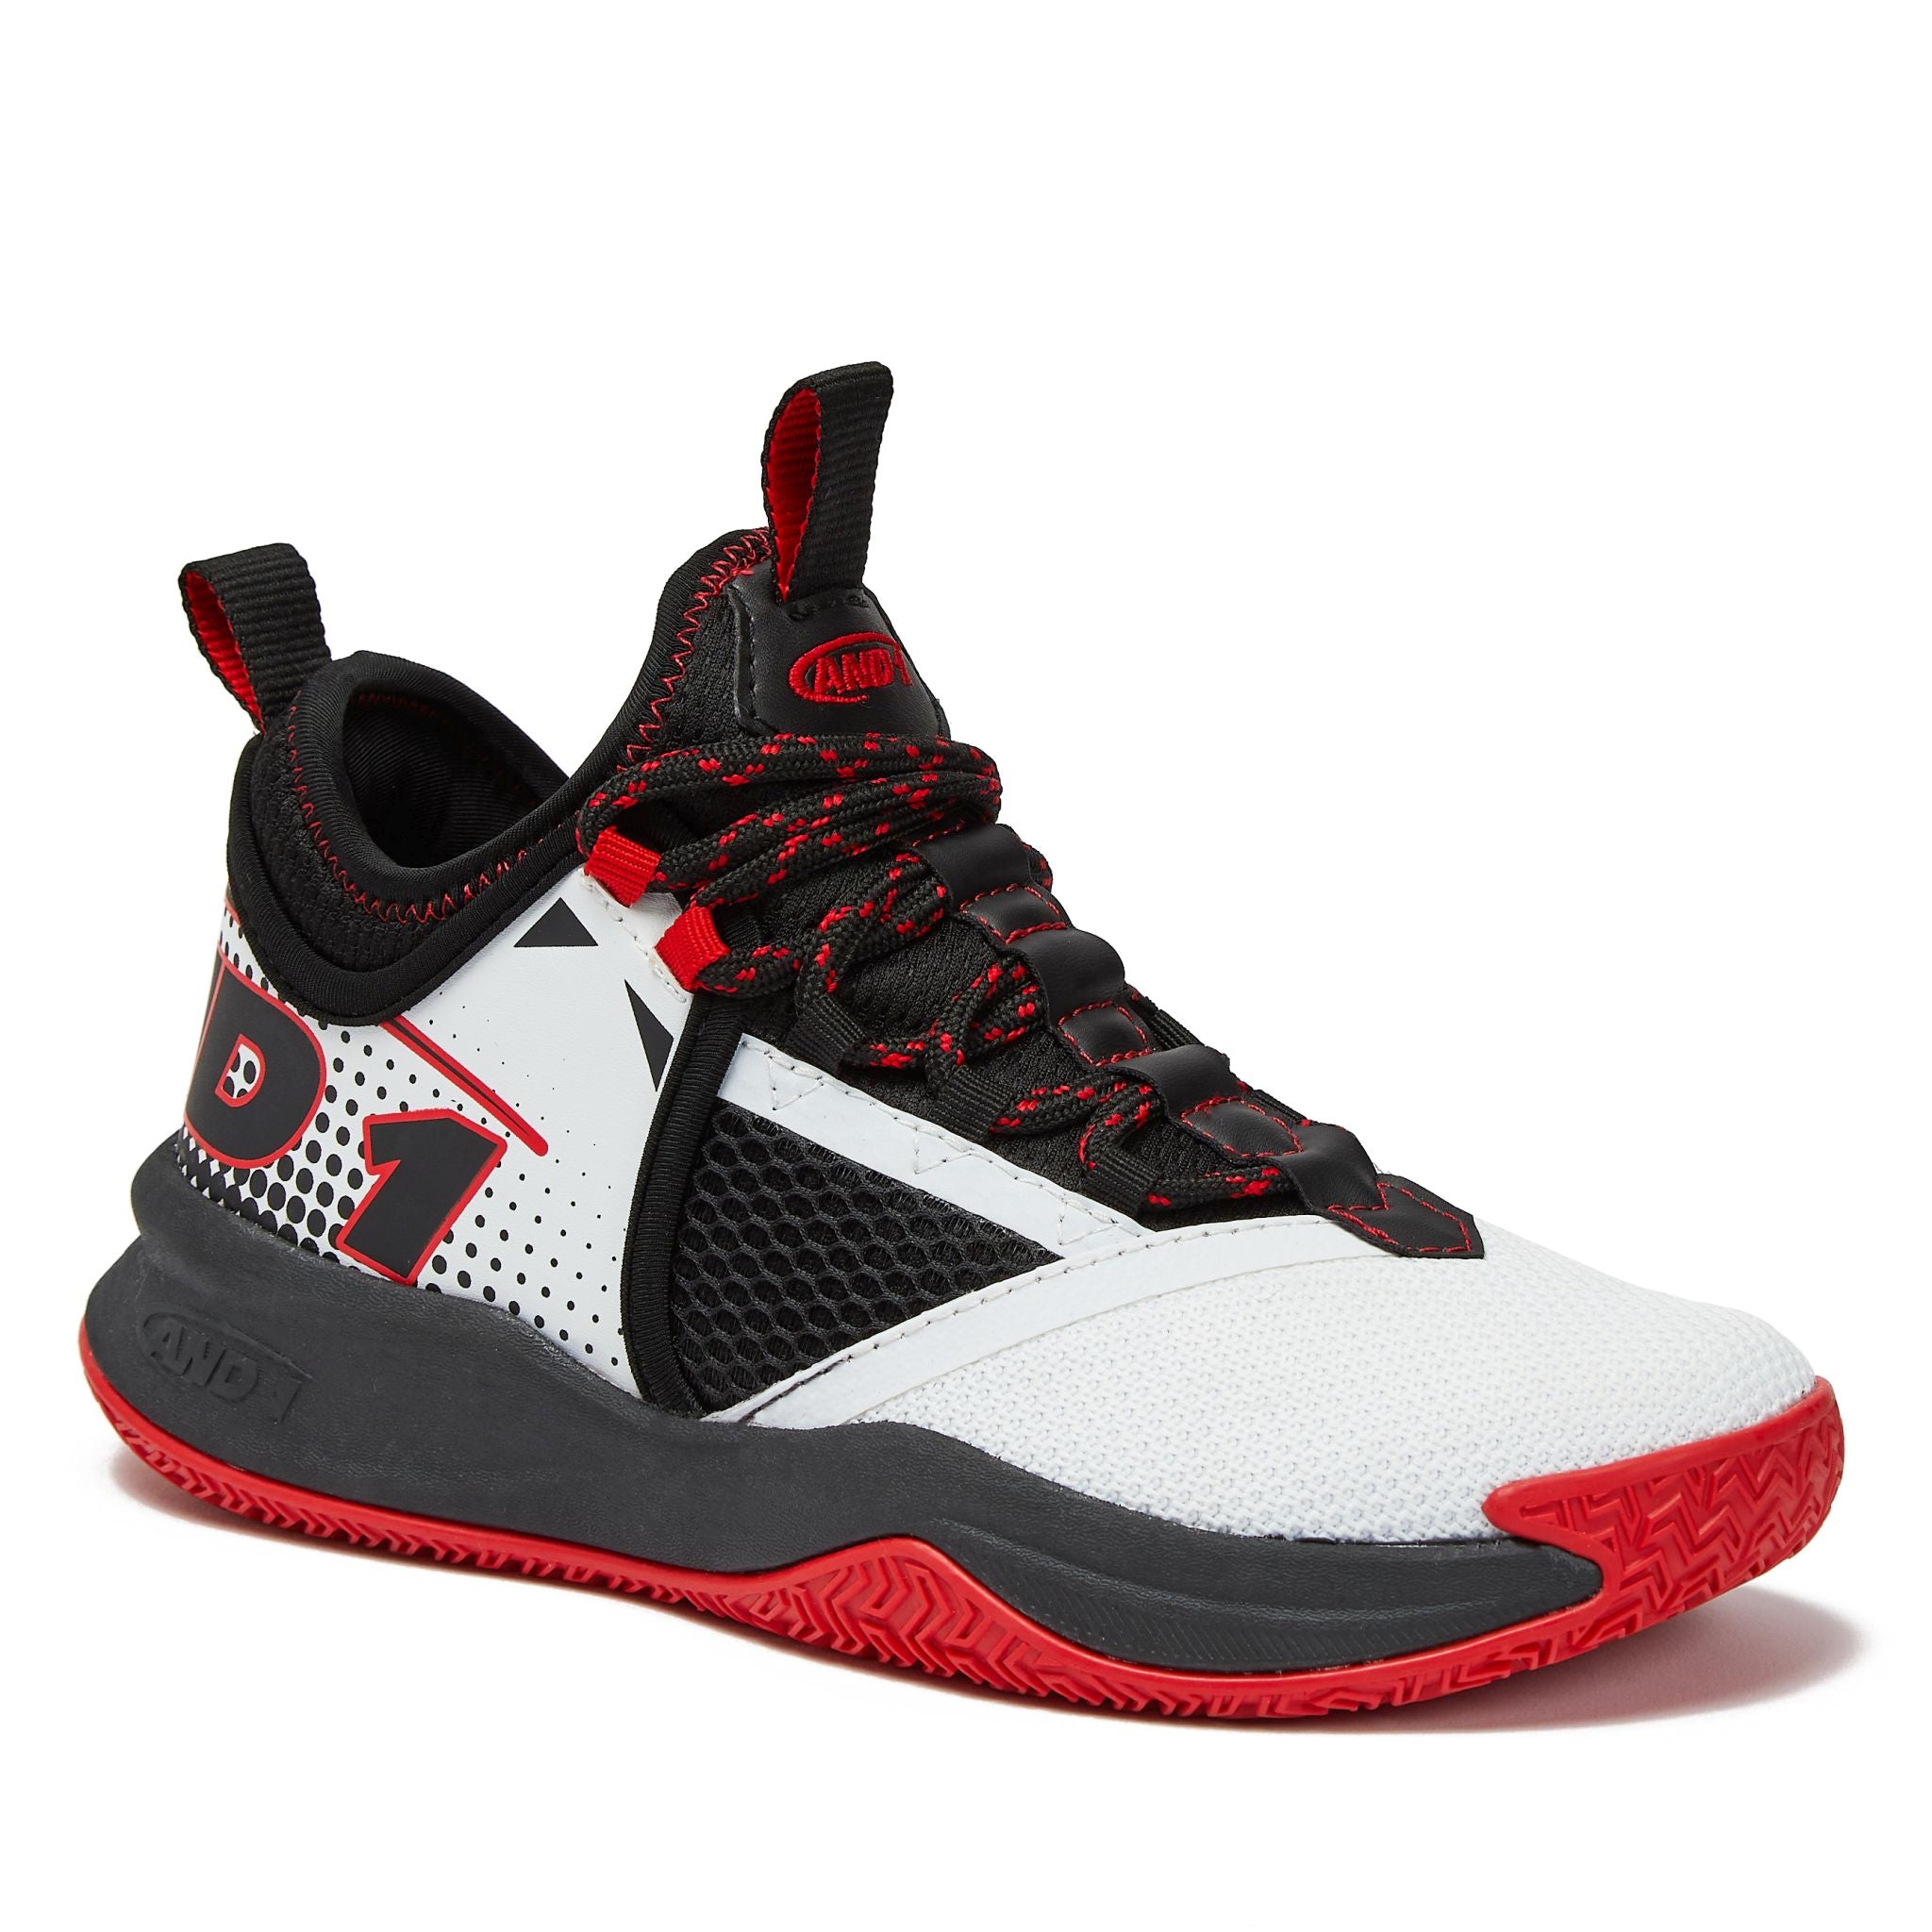 AND1 Charge GS Kids Basketball Shoe